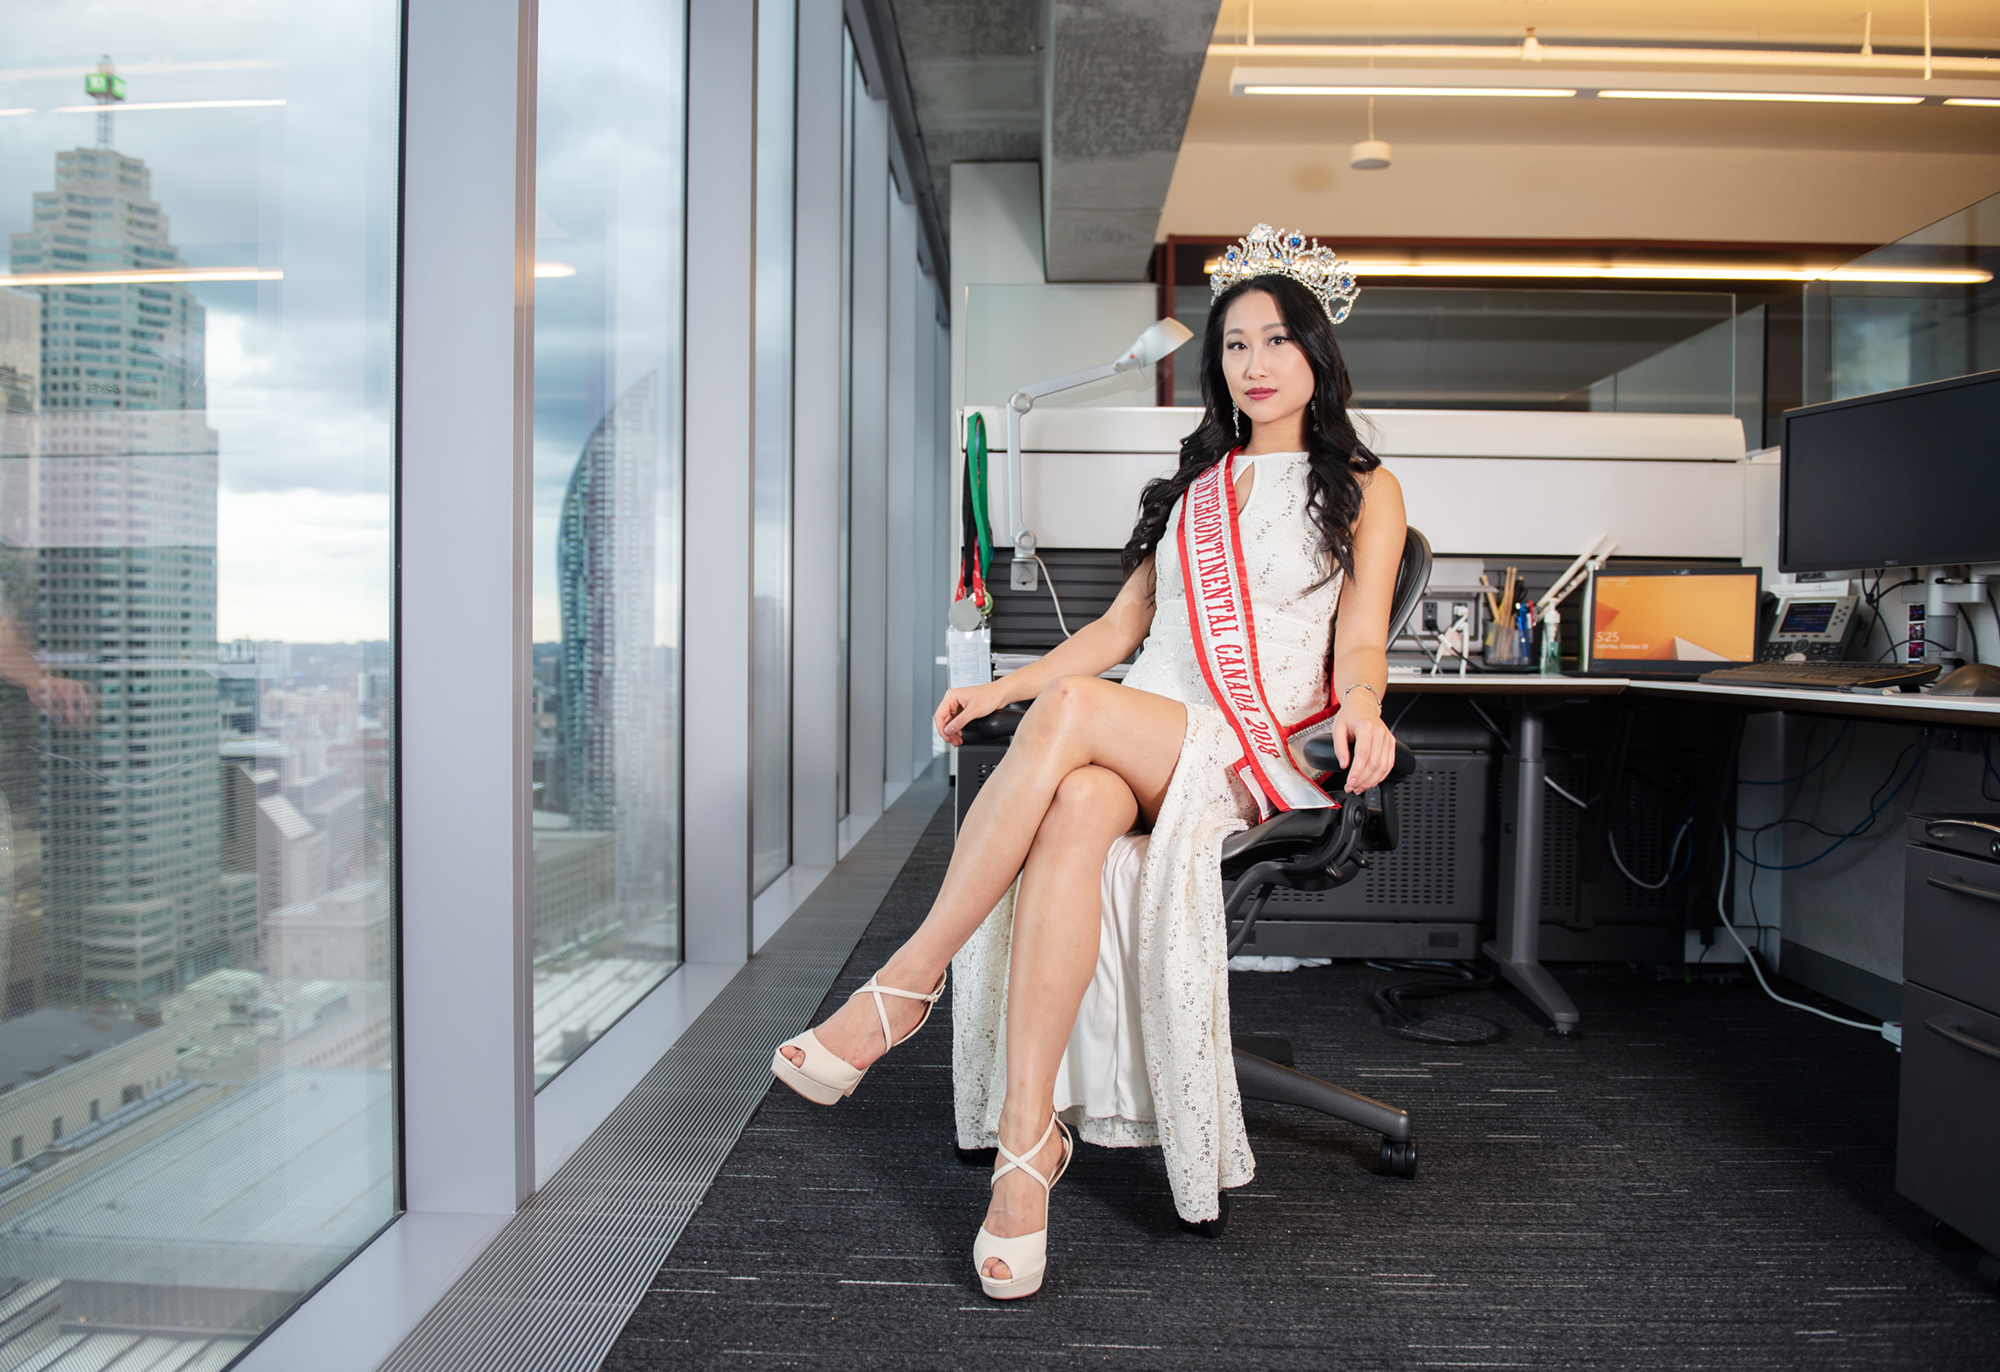  Alice Li, reigning Miss Intercontinental Canada 2018, at her office. She works full-time as an accountant while also doing pageants, and busking at TTC stations and other public spaces around Toronto for charity. Alice will be competing in the Miss 